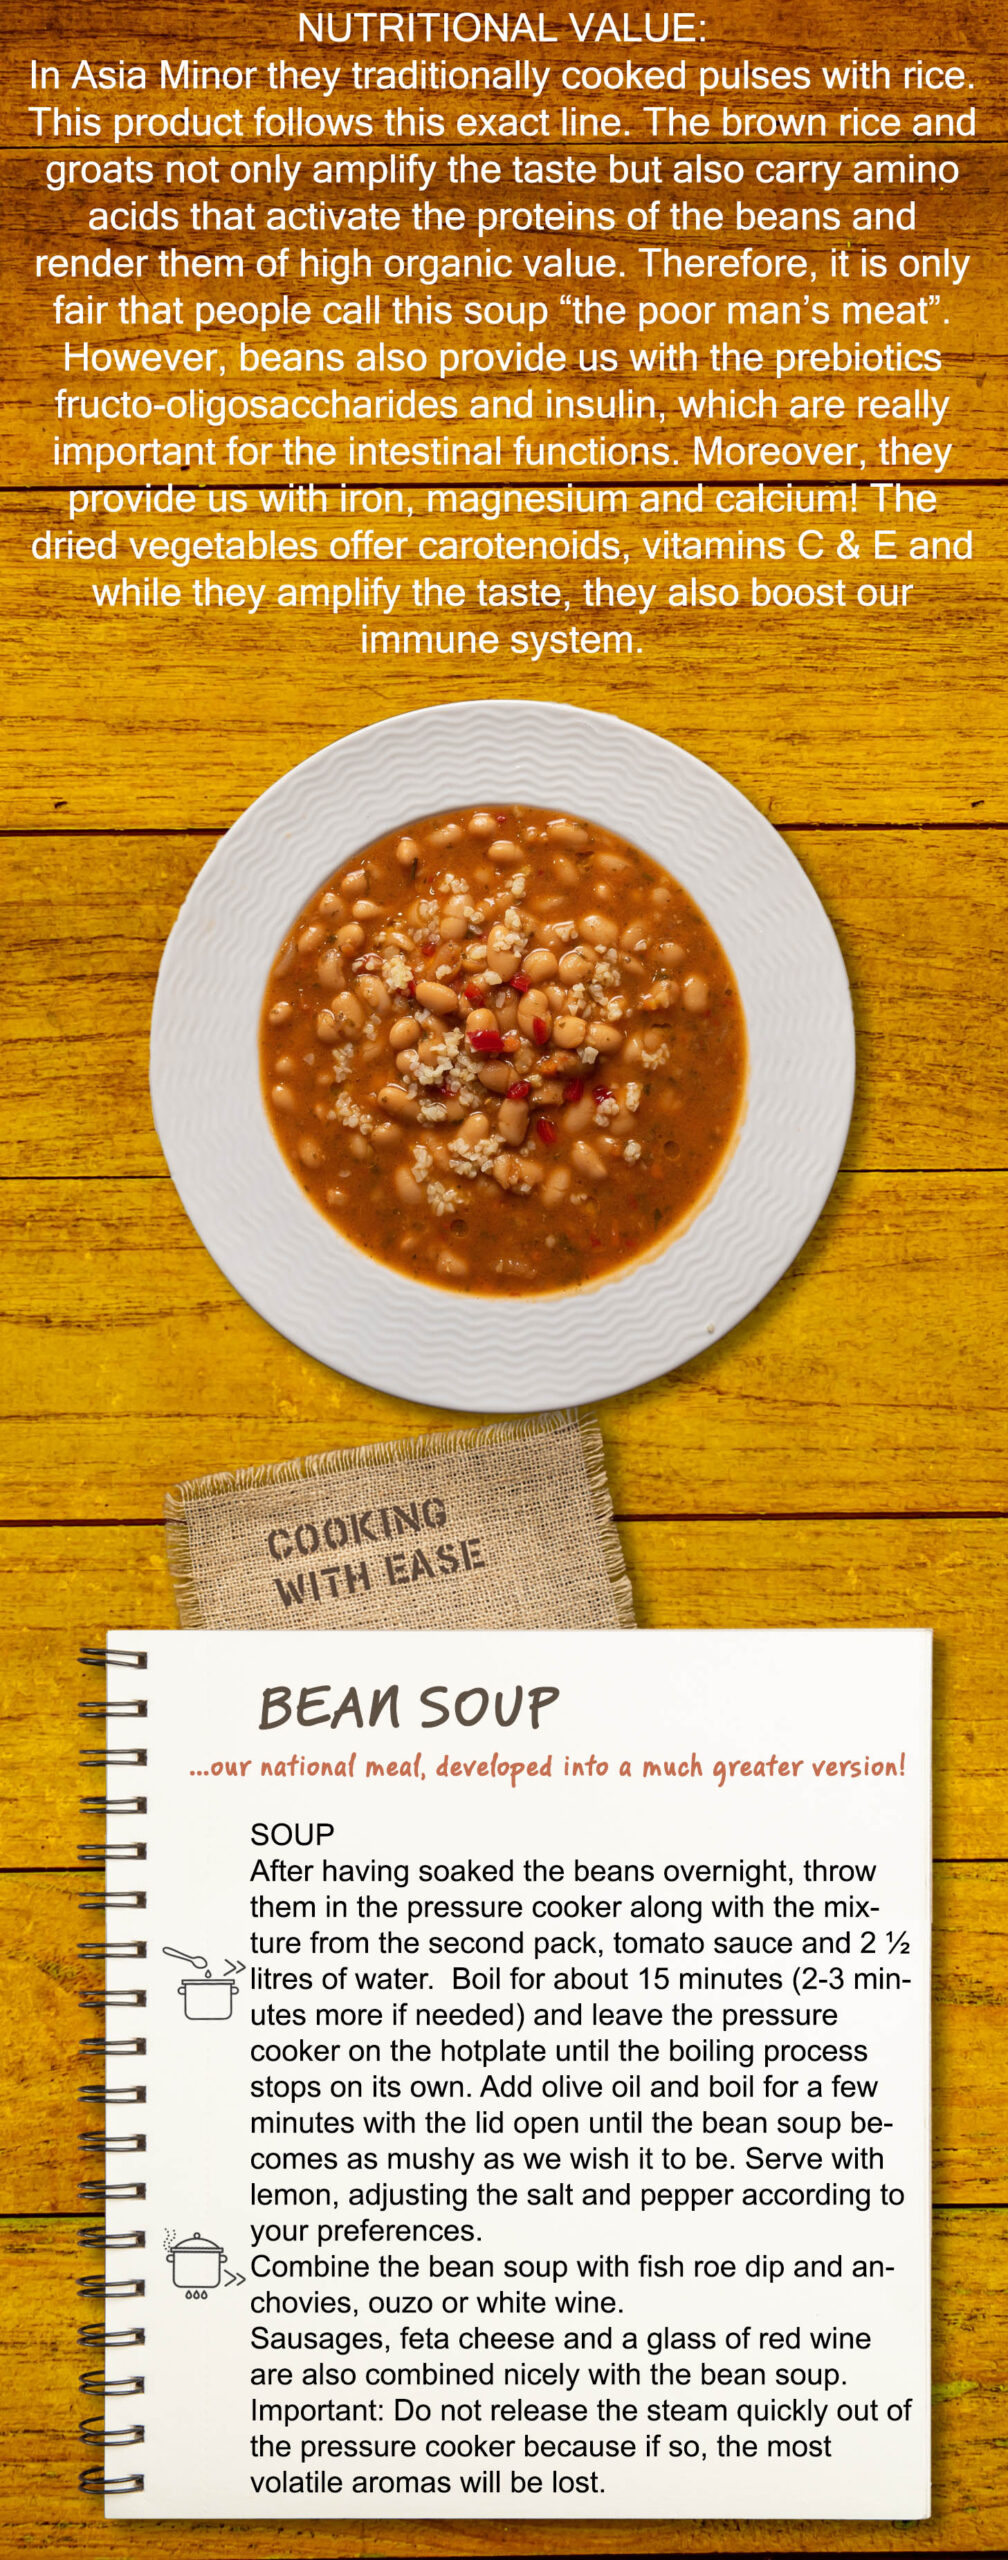 In Asia Minor they traditionally cooked pulses with rice. This product follows this exact line. The brown rice and groats not only amplify the taste but also carry amino acids that activate the proteins of the beans and render them of high organic value. Therefore, it is only fair that people call this soup “the poor man’s meat”. However, beans also provide us with the prebiotics fructo-oligosaccharides and insulin, which are really important for the intestinal functions. Moreover, they provide us with iron, magnesium and calcium! The dried vegetables offer carotenoids, vitamins C & E and while they amplify the taste, they also boost our immune system. SOUP After having soaked the beans overnight, throw them in the pressure cooker along with the mixture from the second pack, tomato sauce and 2 ½ litres of water. Boil for about 15 minutes (2-3 minutes more if needed) and leave the pressure cooker on the hotplate until the boiling process stops on its own. Add olive oil and boil for a few minutes with the lid open until the bean soup becomes as mushy as we wish it to be. Serve with lemon, adjusting the salt and pepper according to your preferences. Combine the bean soup with fish roe dip and anchovies, ouzo or white wine. Sausages, feta cheese and a glass of red wine are also combined nicely with the bean soup. Important: Do not release the steam quickly out of the pressure cooker because if so, the most volatile aromas will be lost.